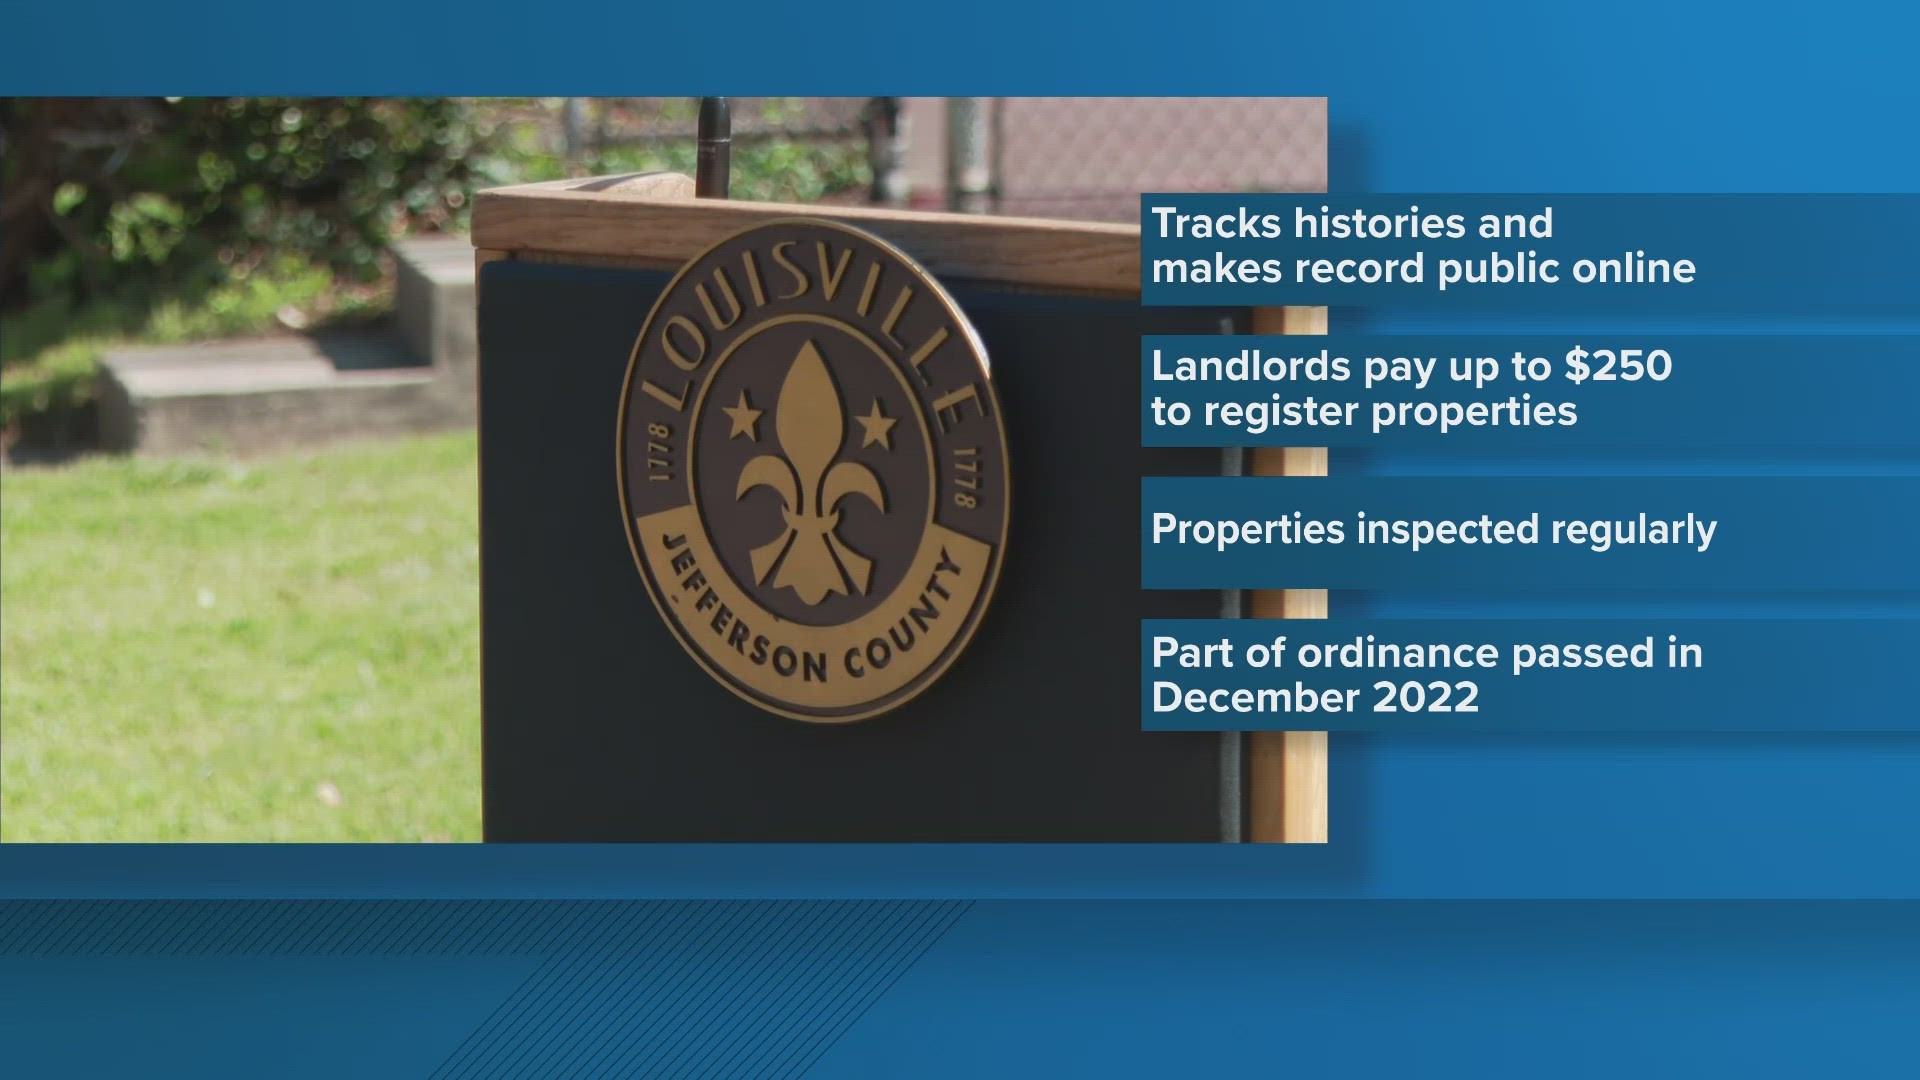 Louisville's new rental registry program tracks long-term rental histories and makes the data public online. The properties must go through regular inspections.